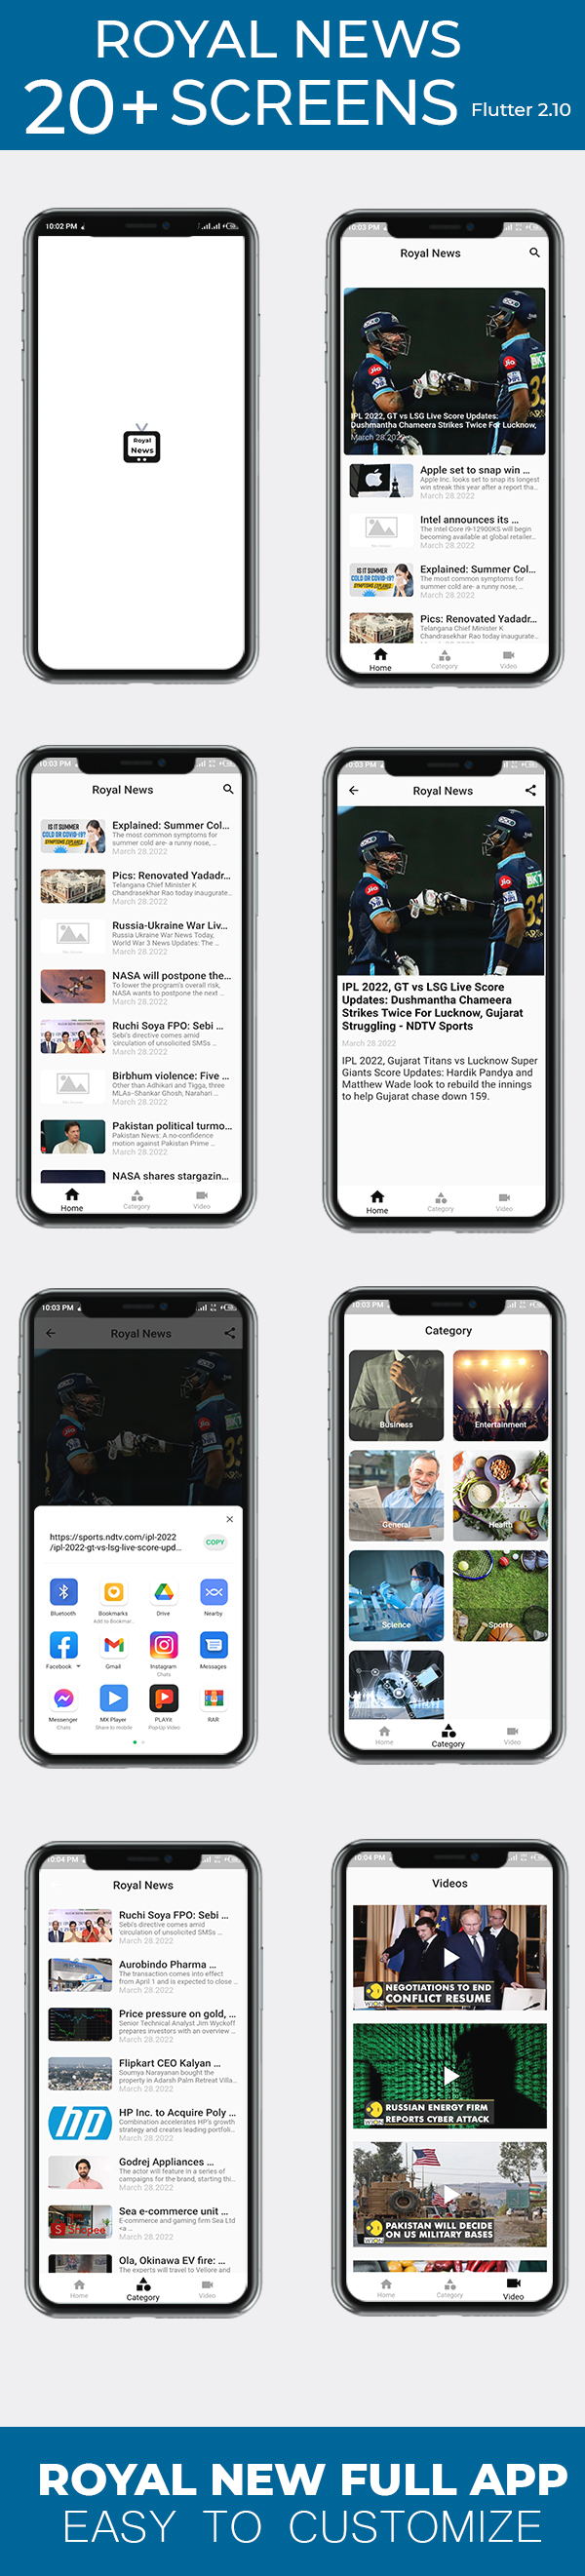 Royal News App | Flutter 2.10 + With Null Safety in Android - 1